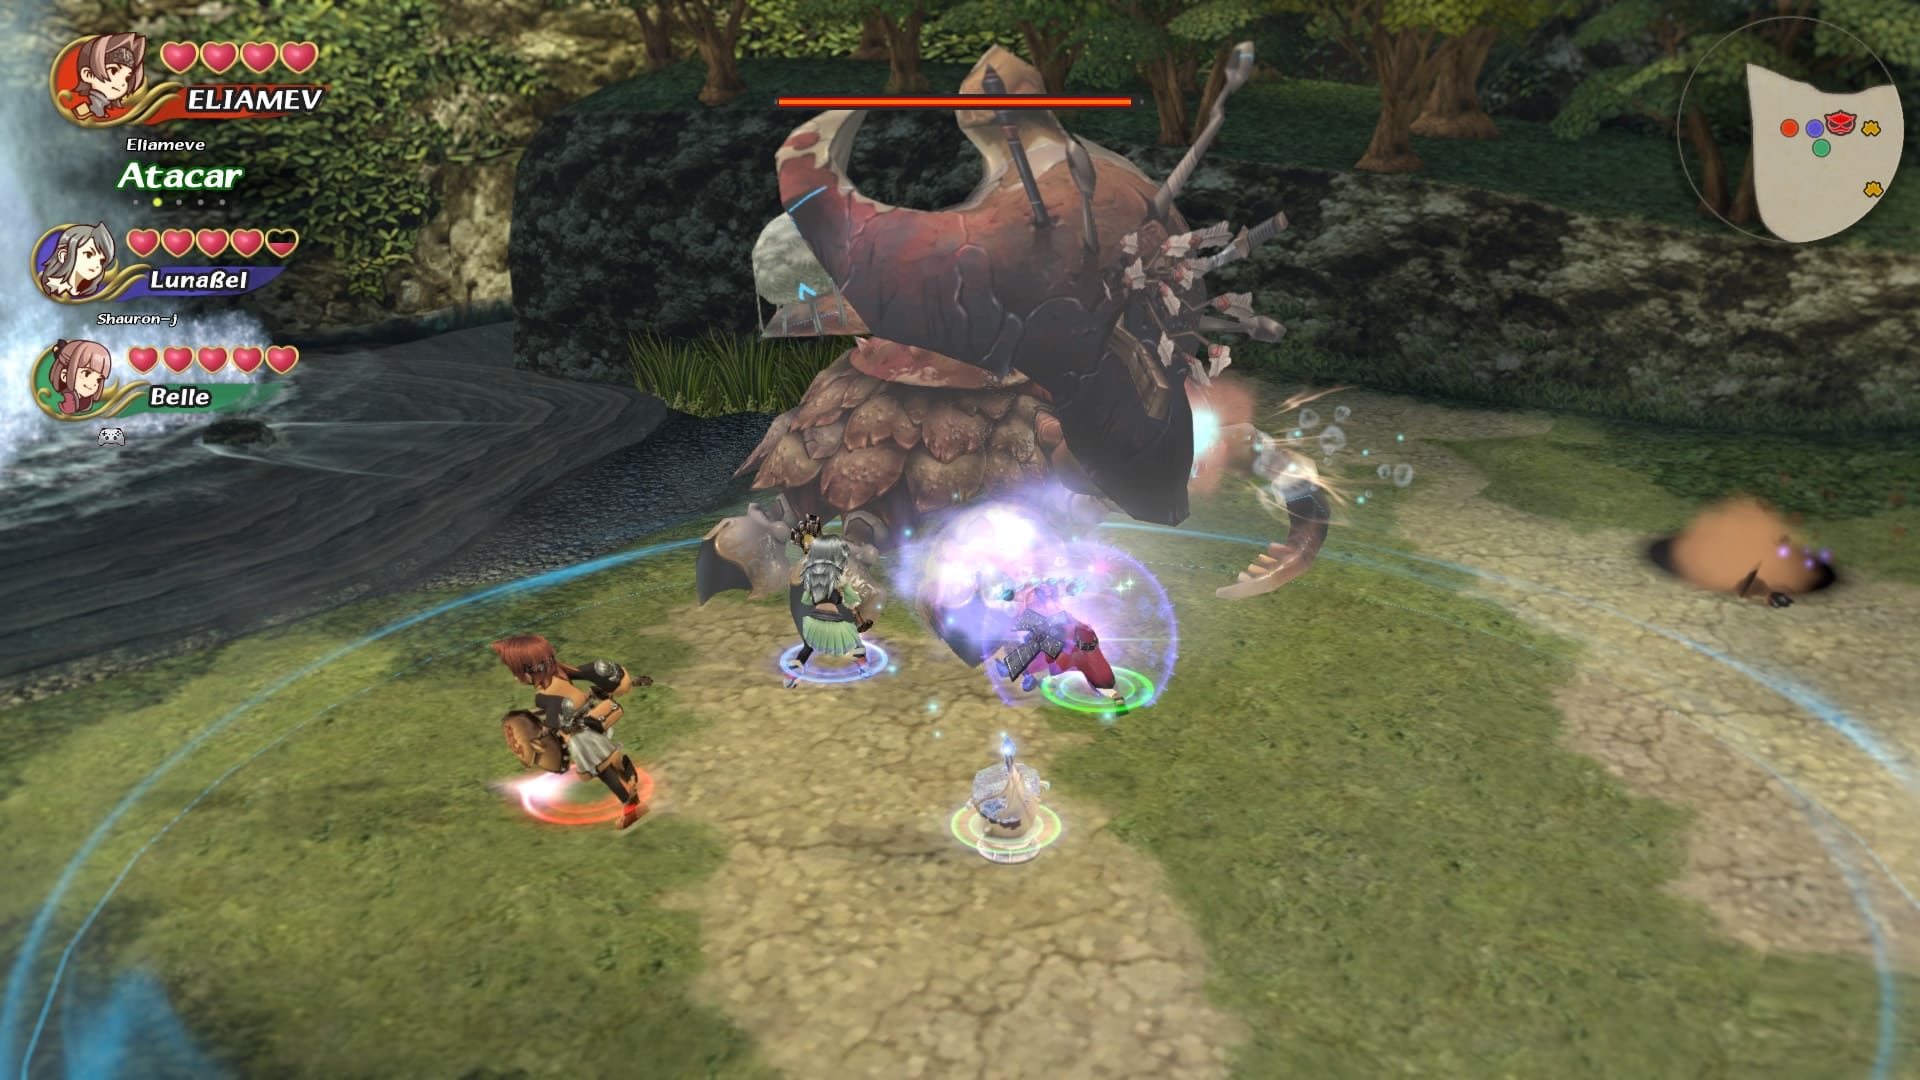 Final Fantasy Crystal Chronicles Remastered Edition Review